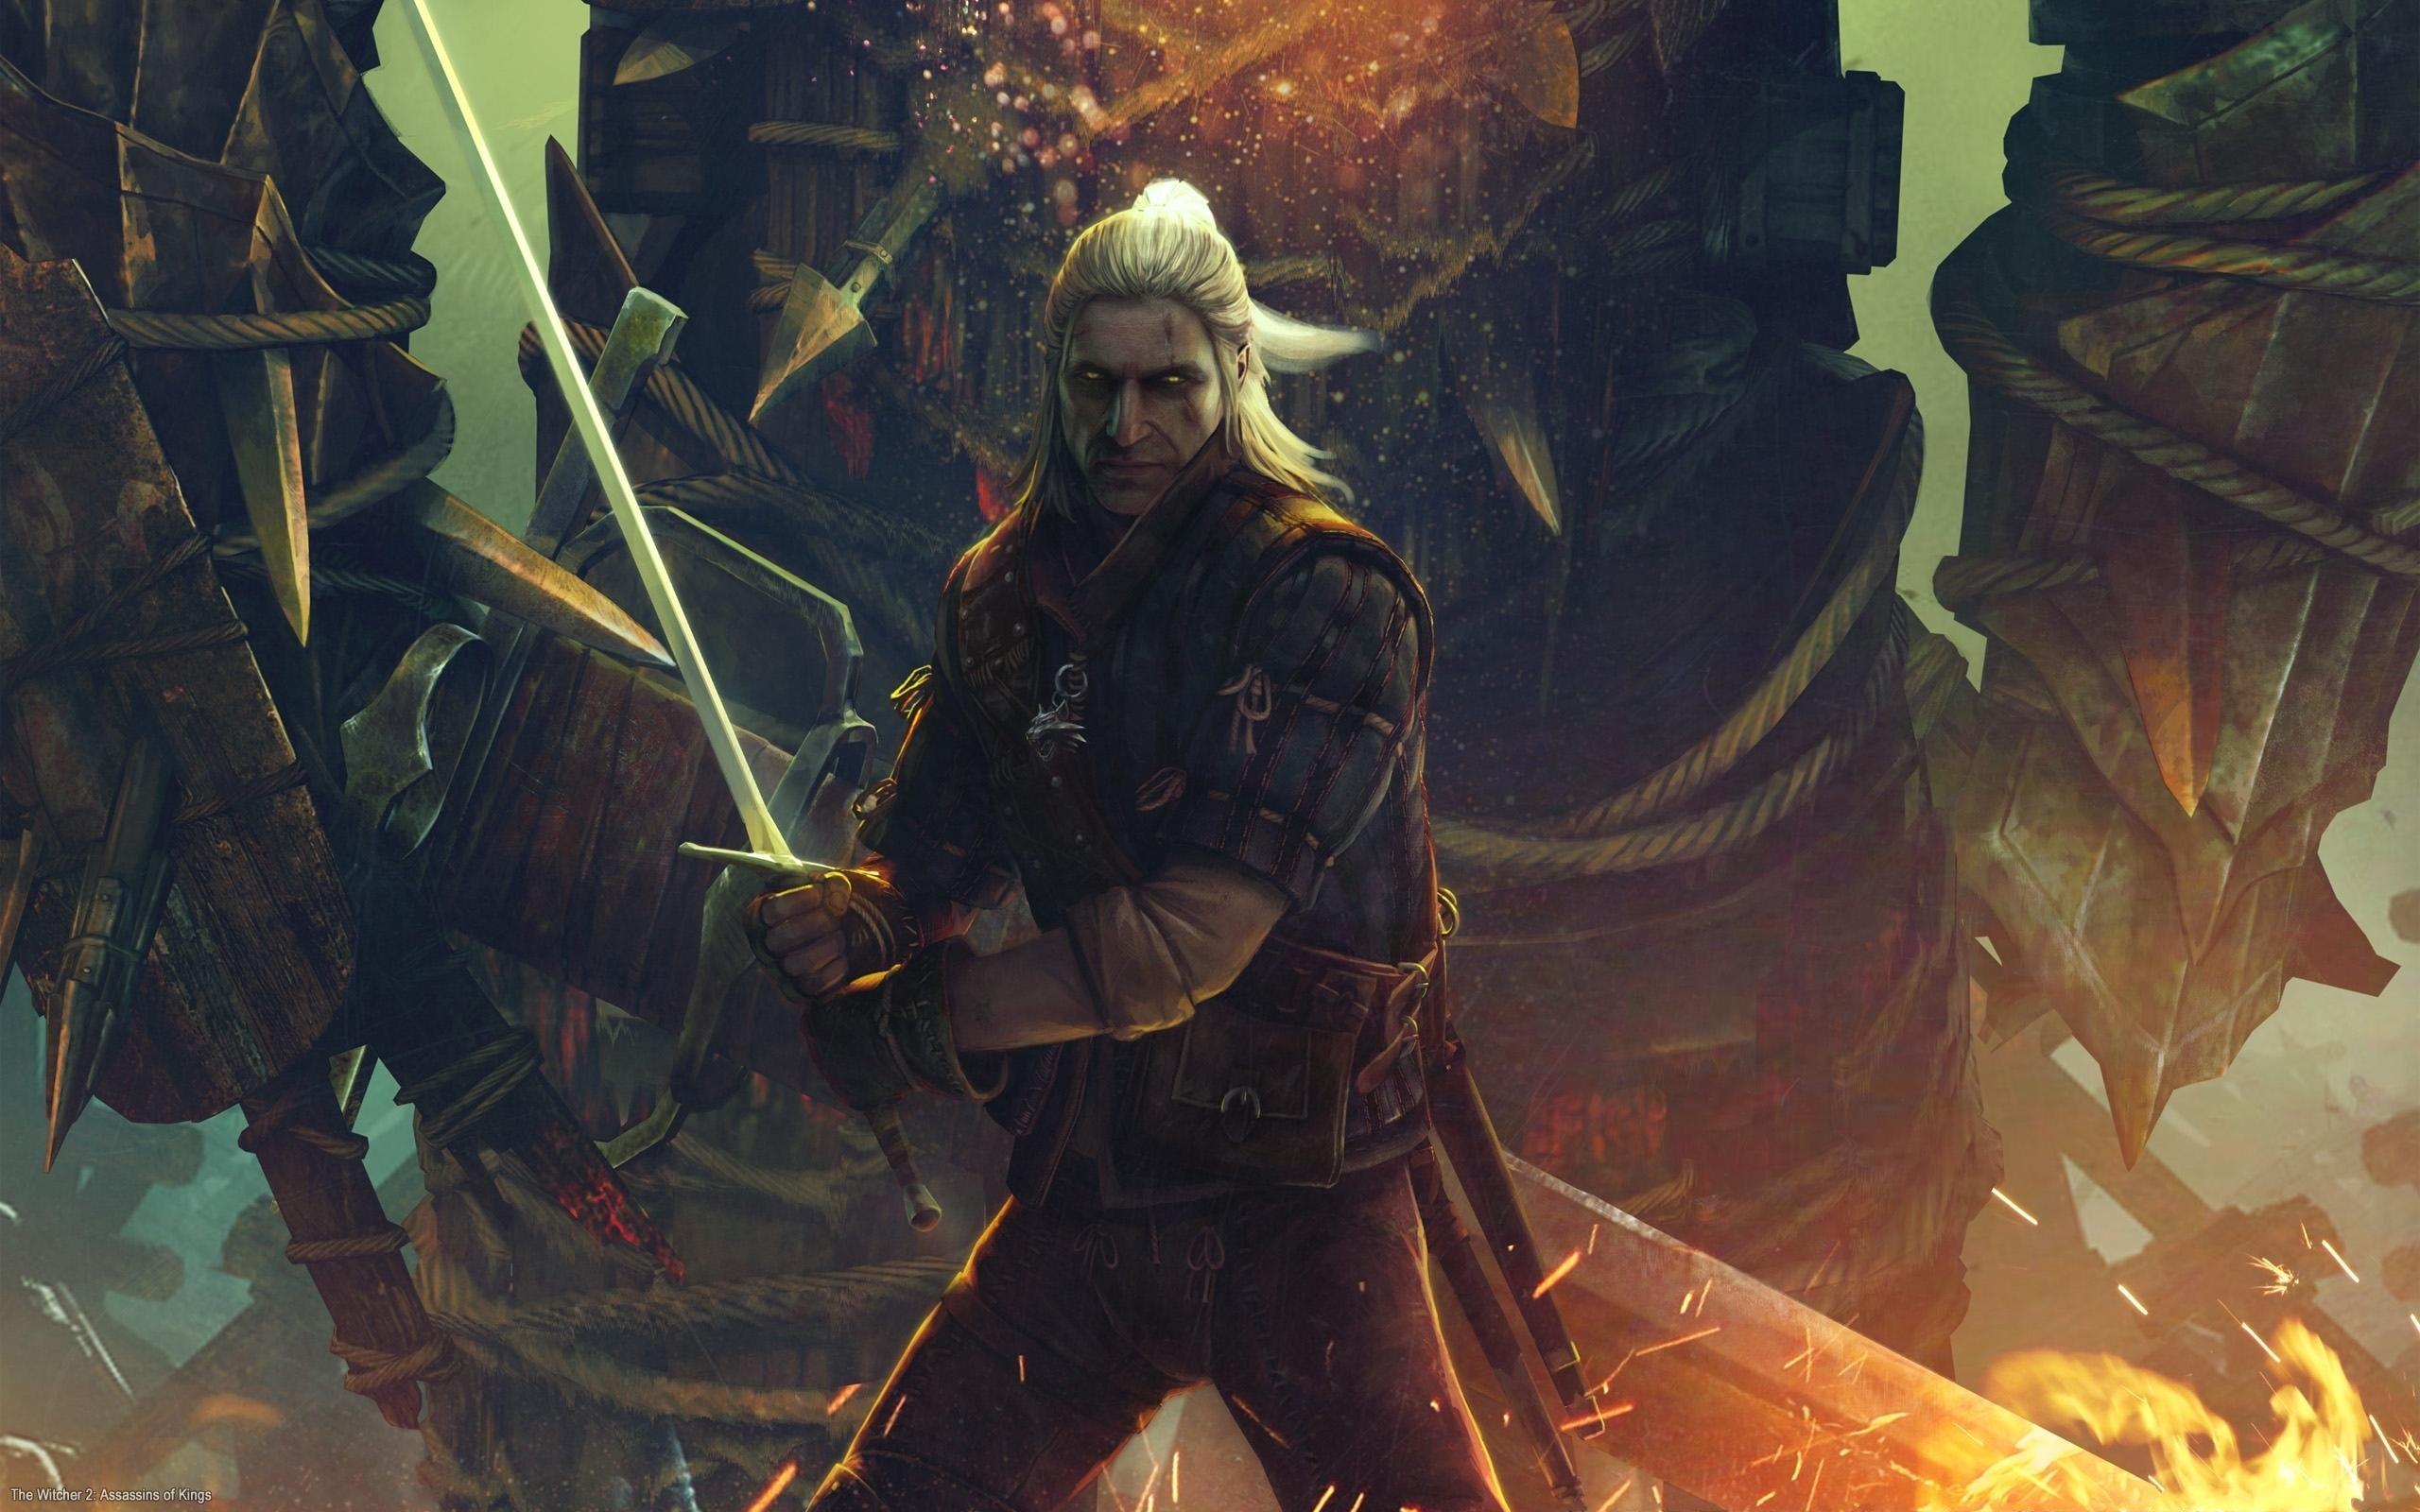 The Witcher 2: Assassins of Kings - Download